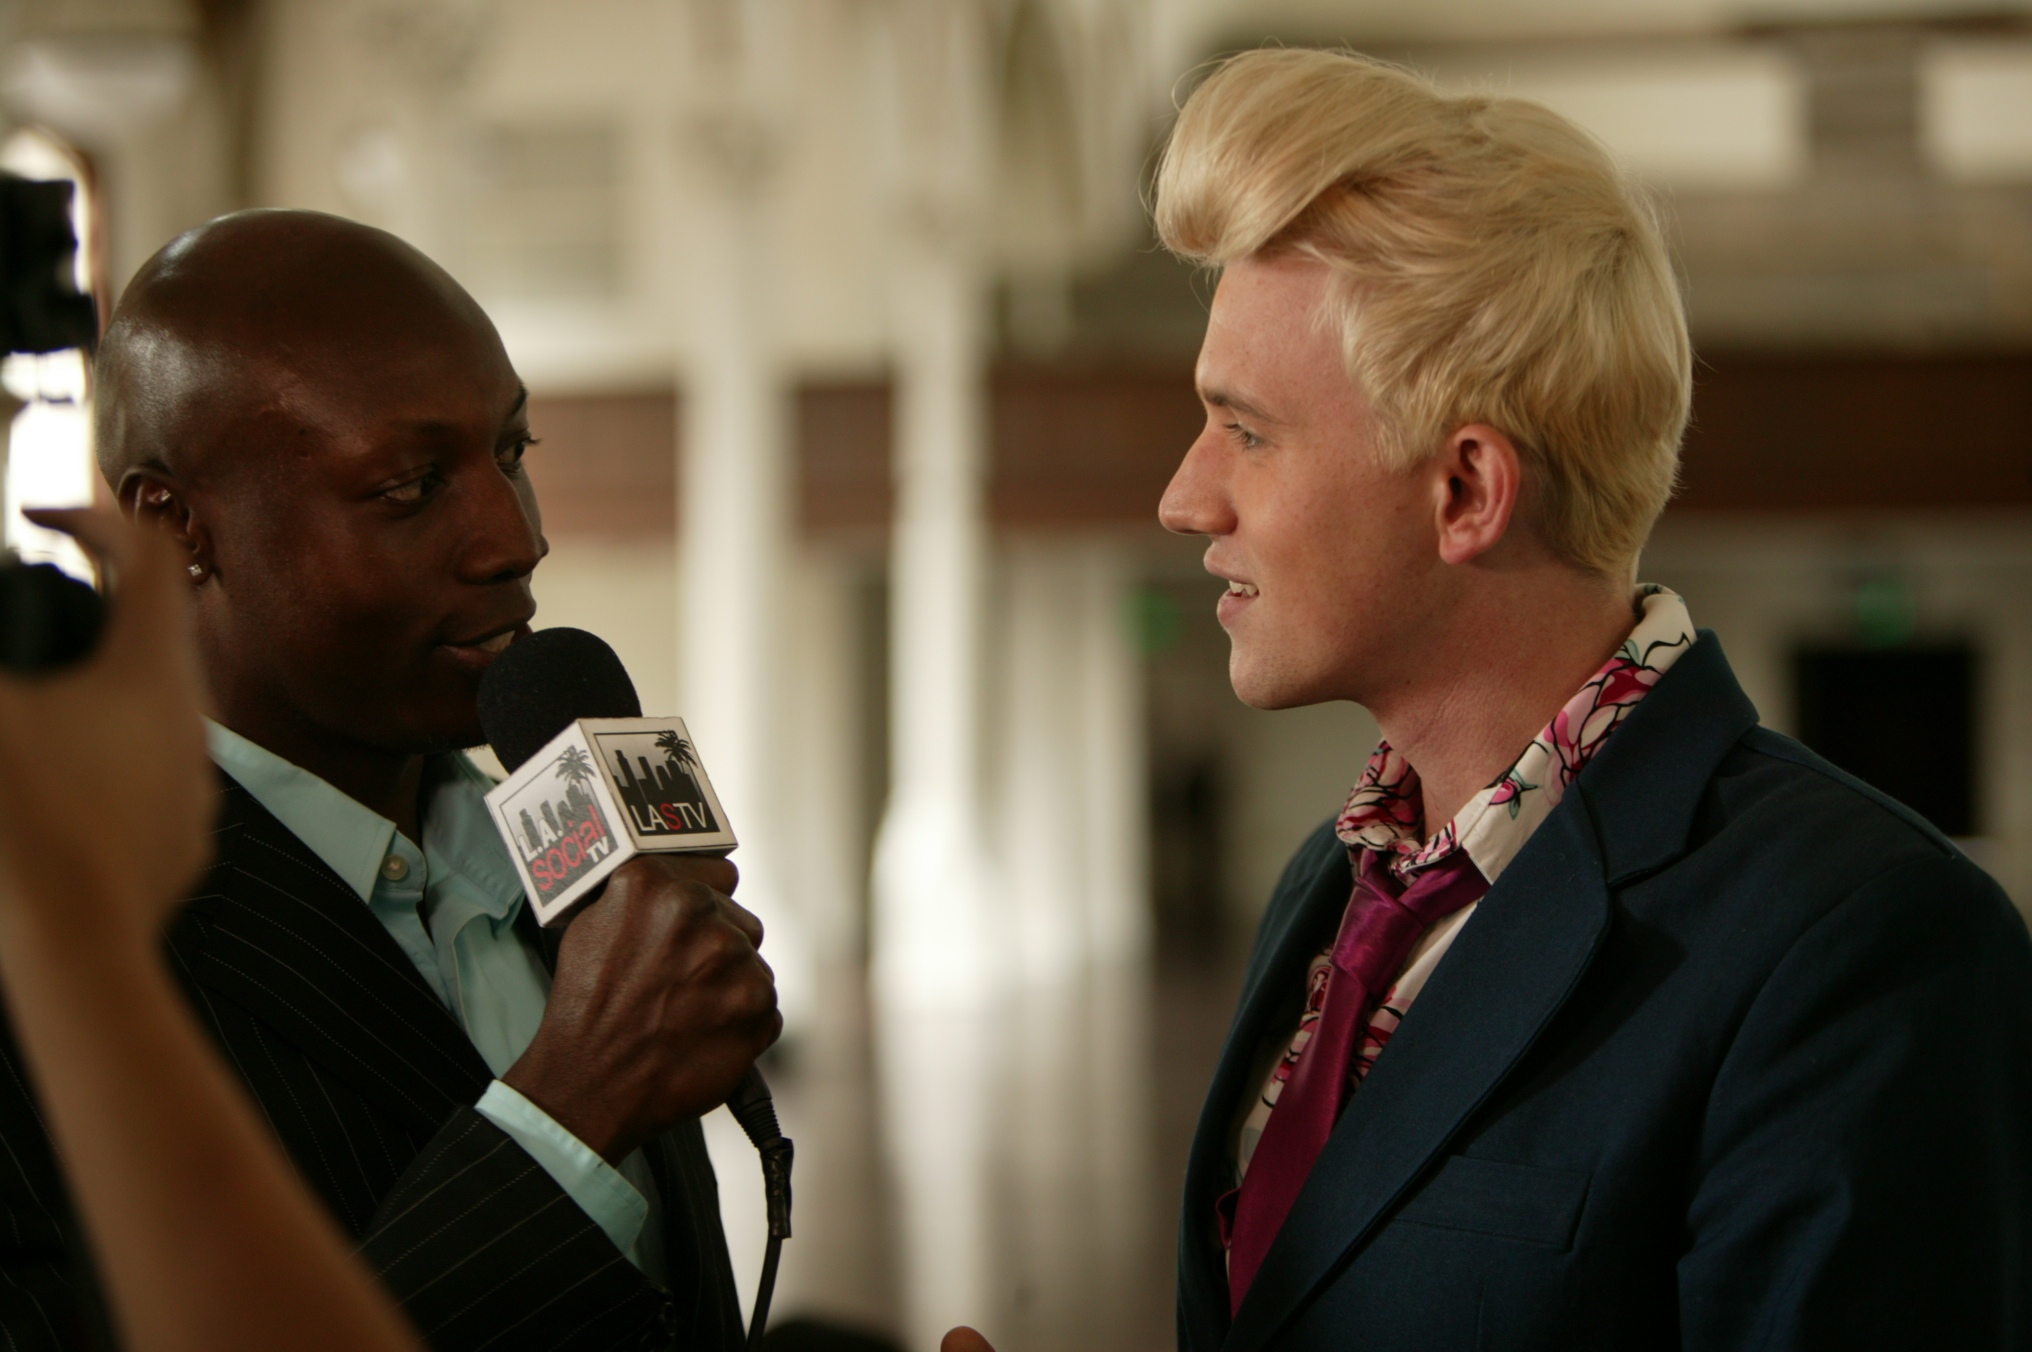 Interview with South African Fashion designer Gert-Johan